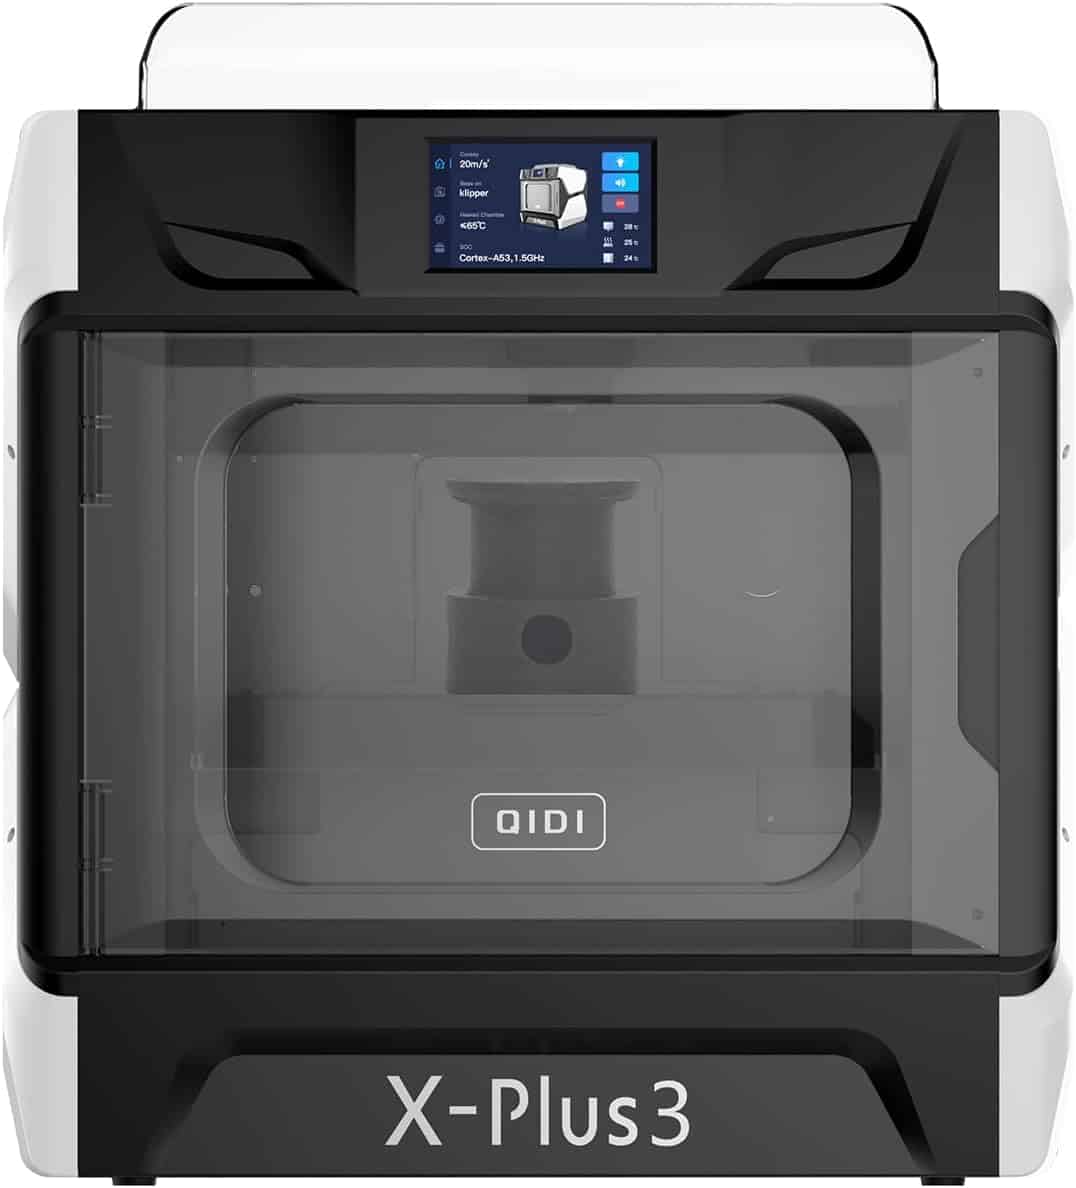 r-qidi-technology-x-plus3-3d-printers-fully-upgrade-600mms-industrial-grade-high-speed-3d-printer-acceleration-20000mms2-5